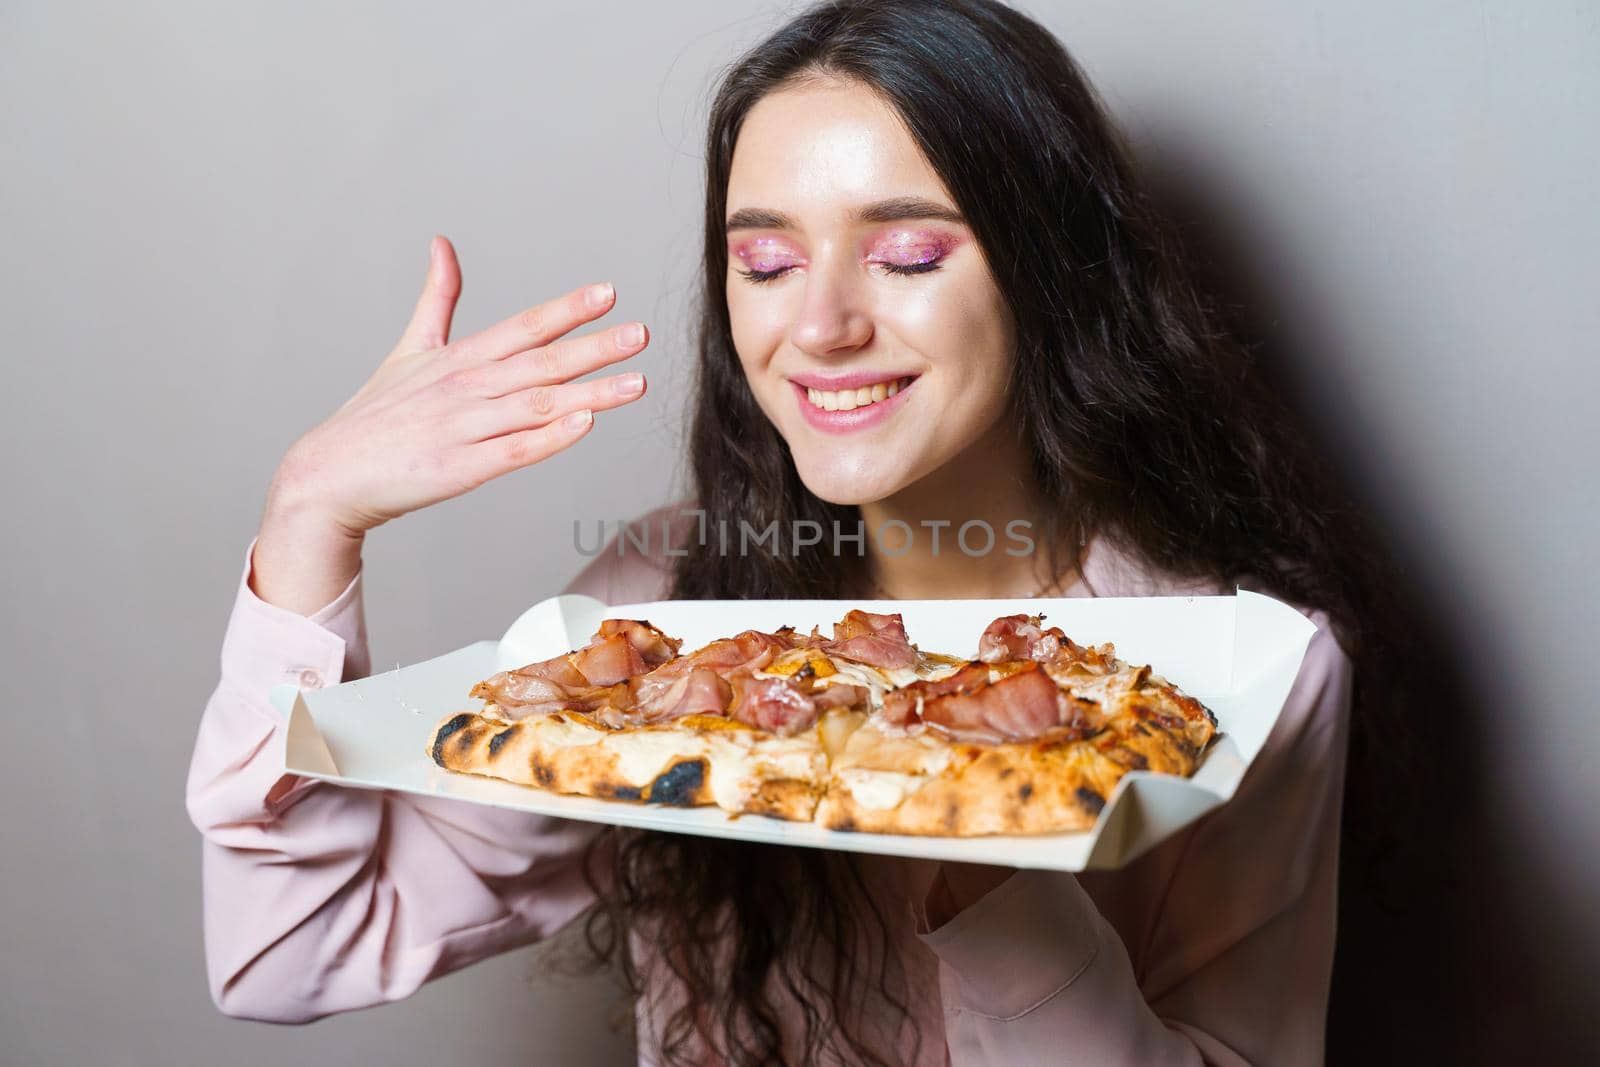 Girl courier with pinsa romana gourmet italian cuisine on grey background. Holding scrocchiarella traditional dish. Food delivery from pizzeria. Pinsa with meat, arugula, olives, cheese.